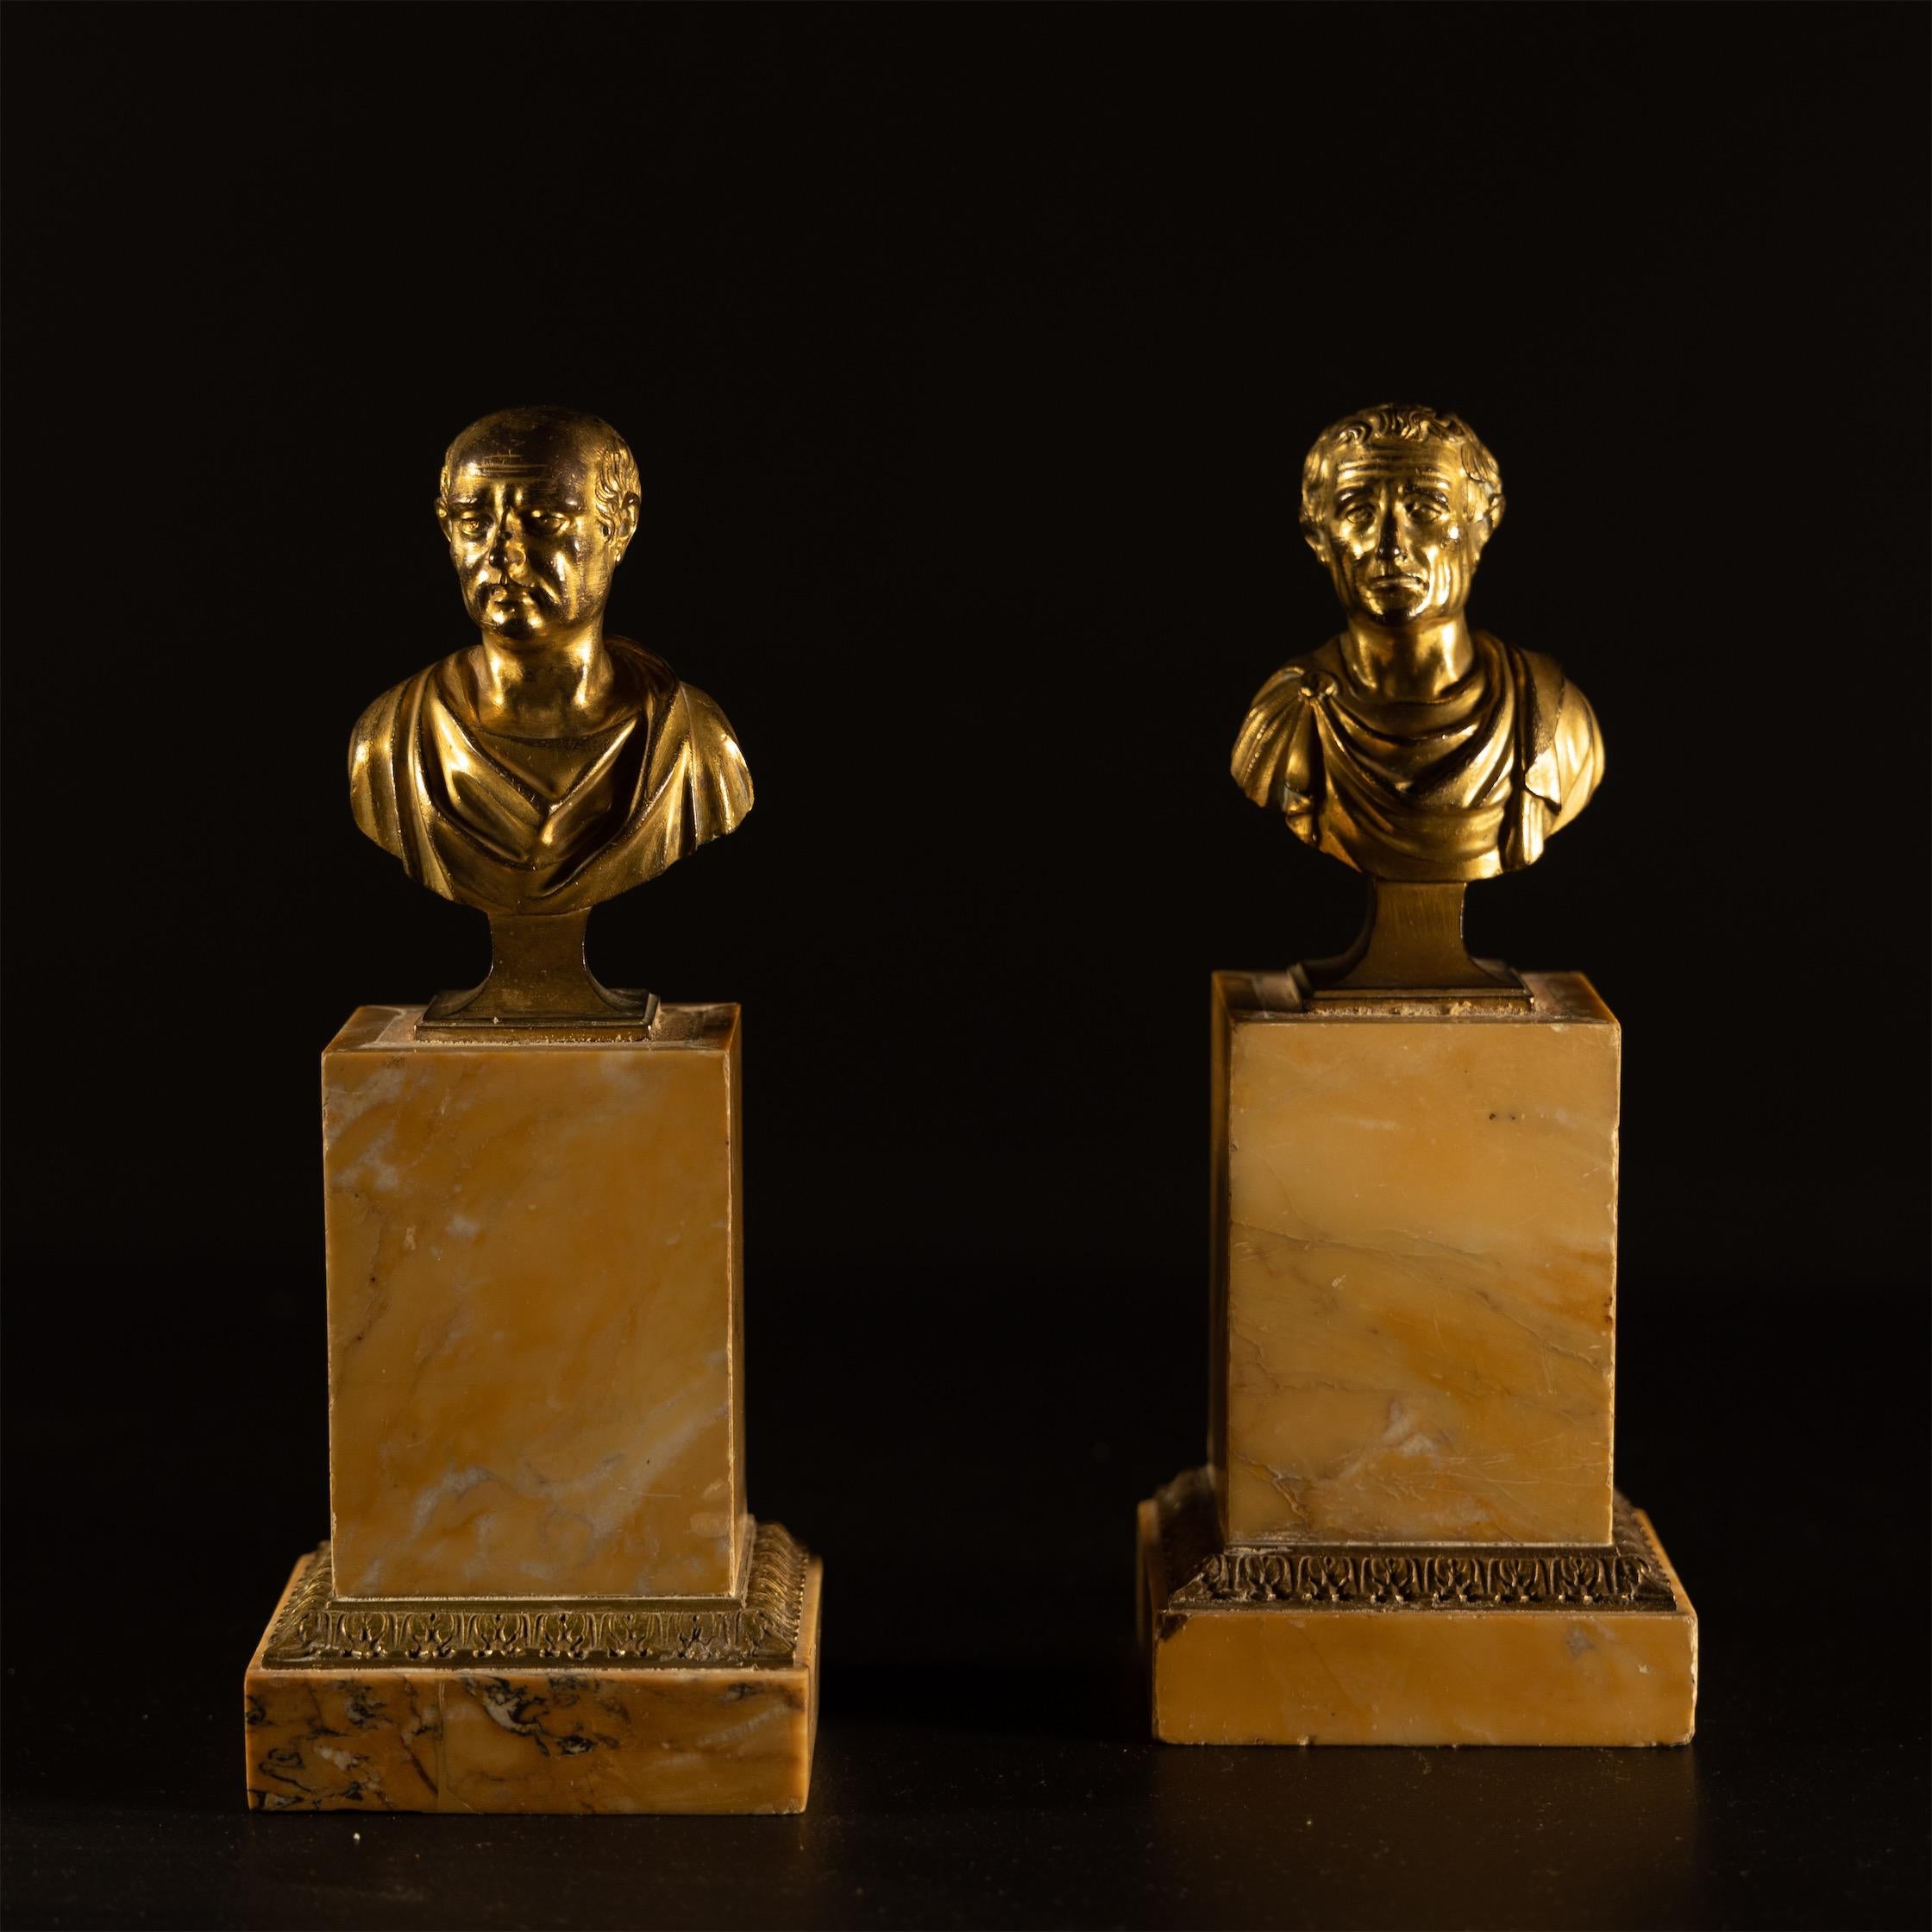 Pair of small gold-patinated bronze busts of two ancient philosophers on Siena marble pedestals (added, 2nd half of 19th century).